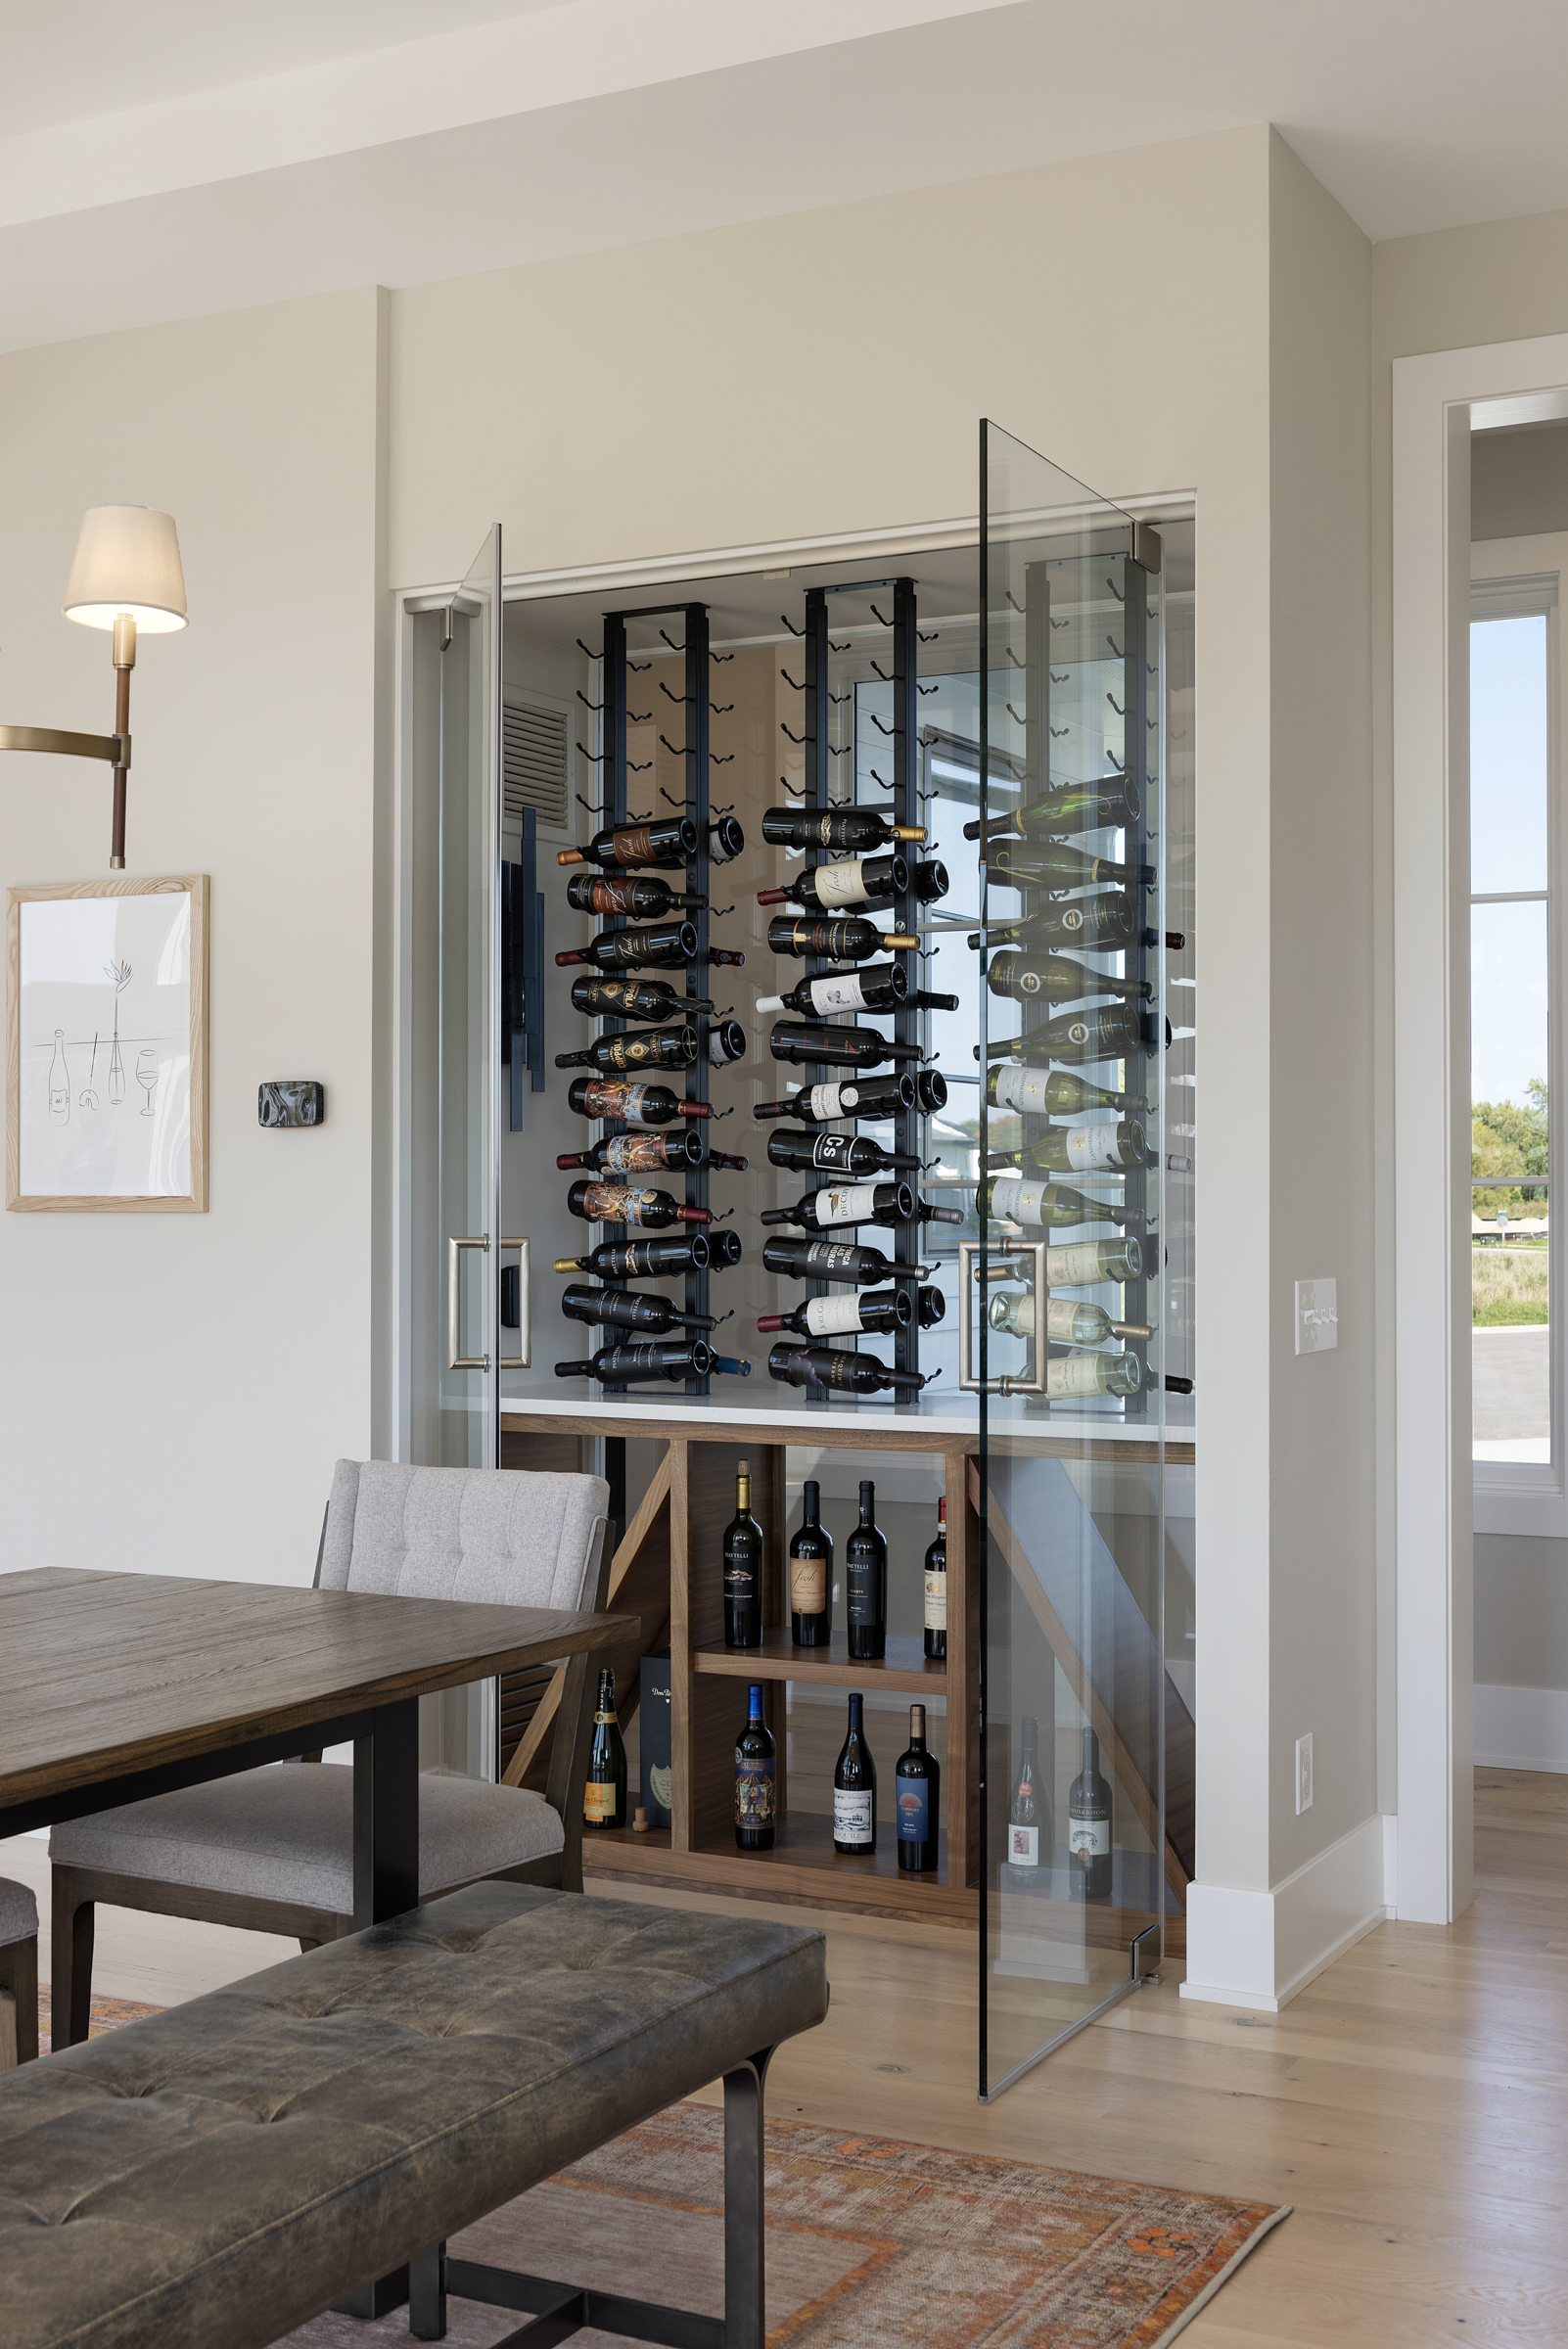 A prairie-style wine rack in a transitional dining room of a custom home.